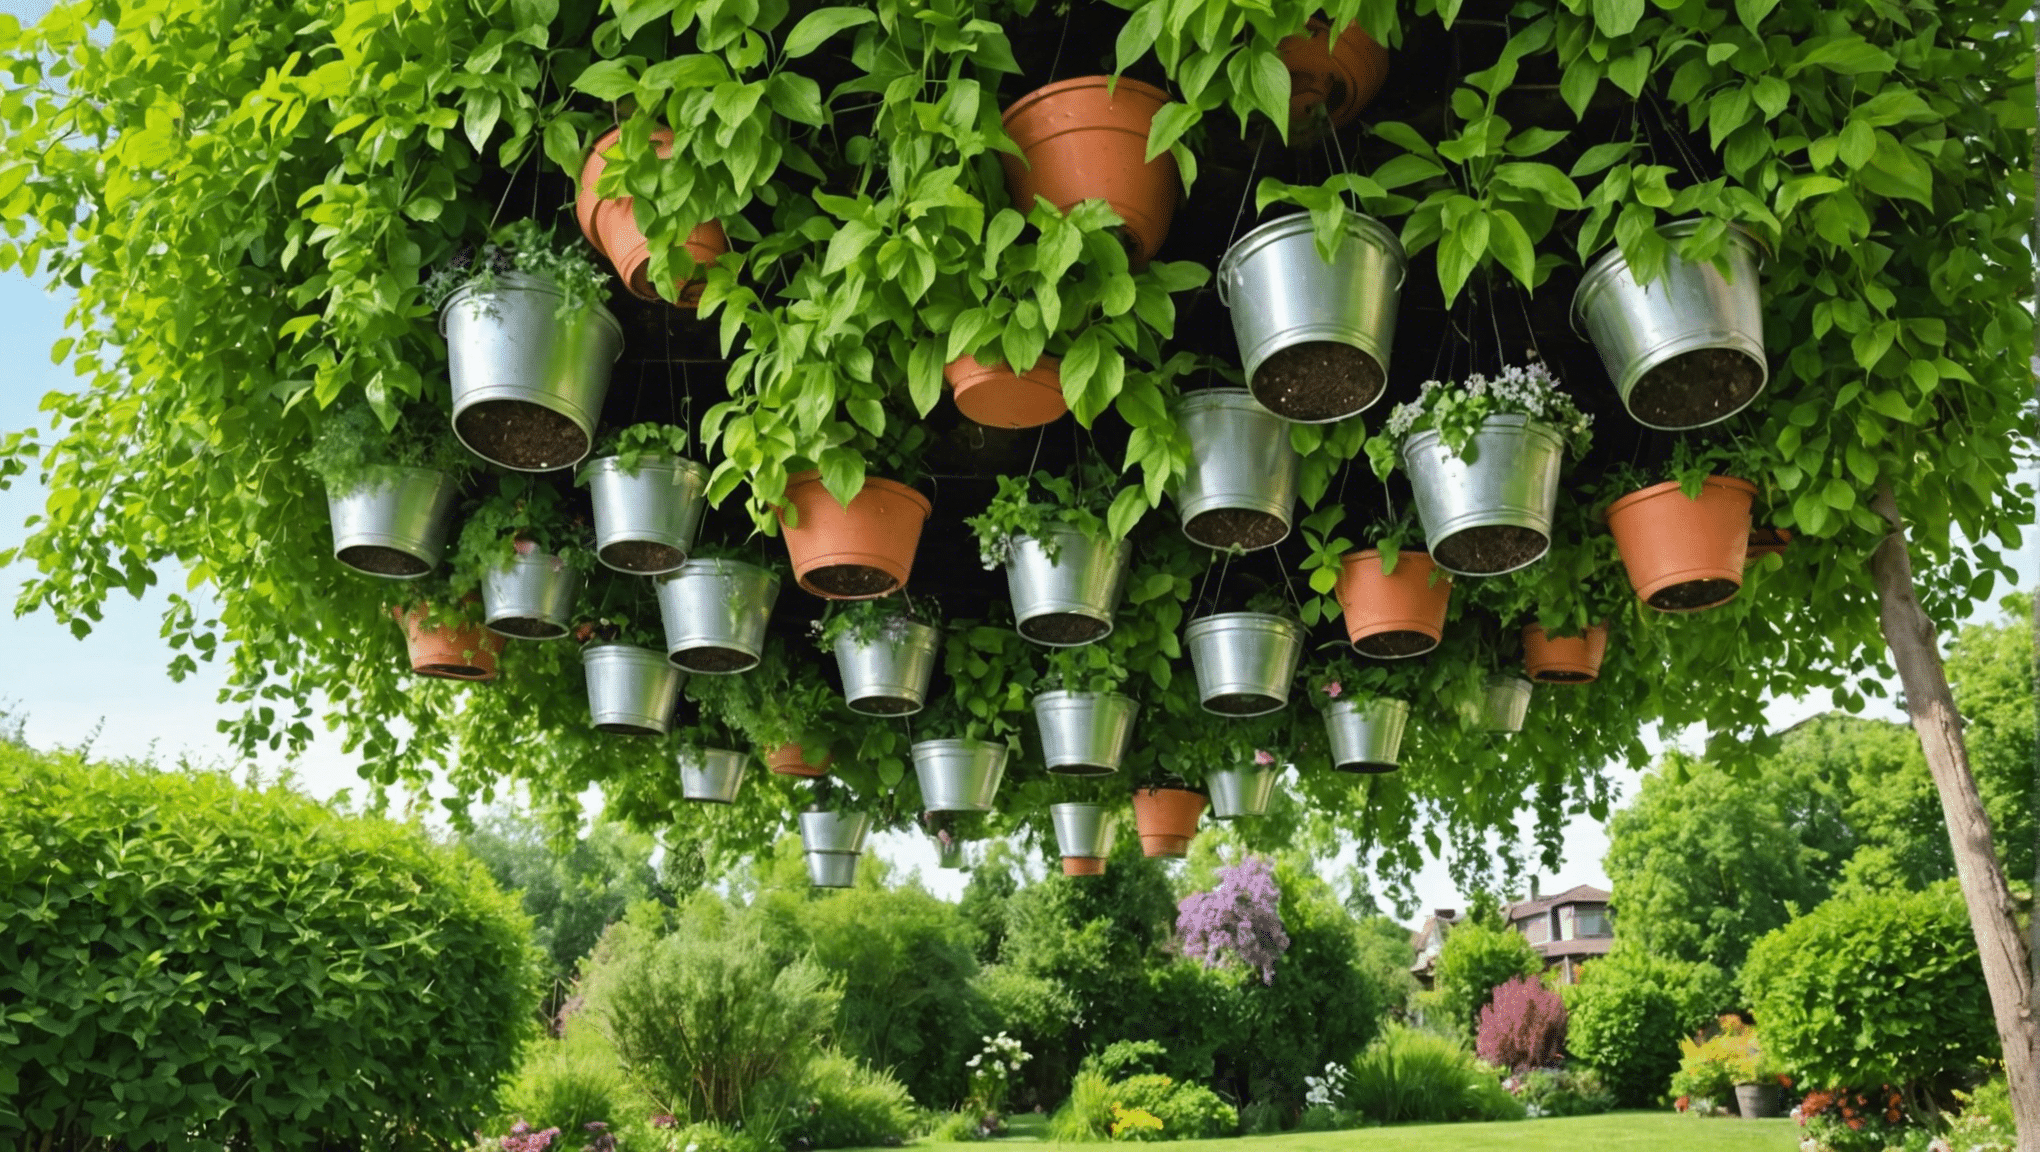 discover creative and unconventional upside down gardening ideas for your unique botanical space. explore innovative techniques and tips for successful upside down gardening.